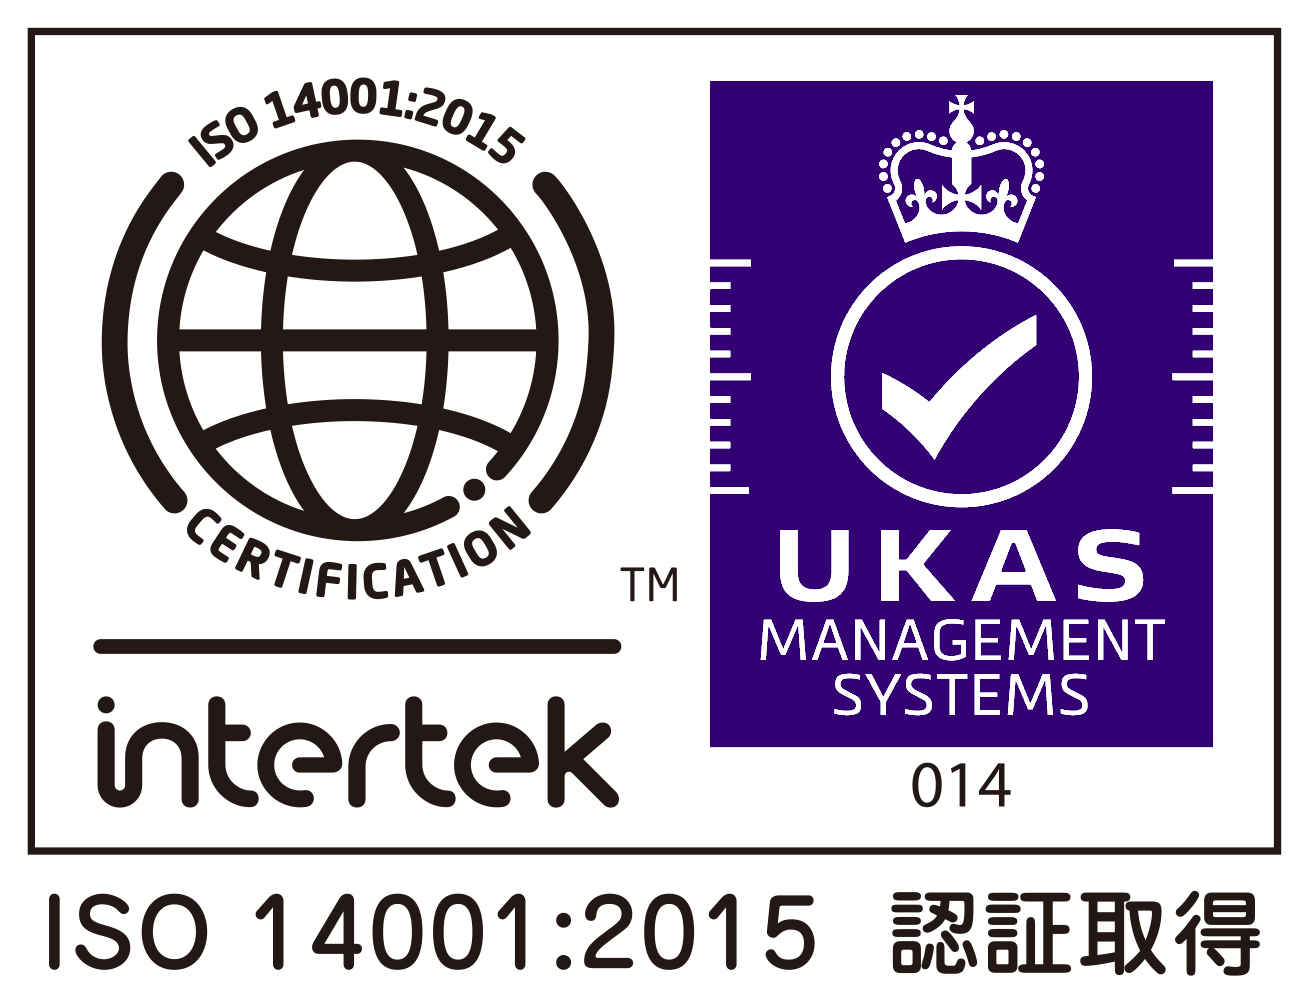 「ISO14001:2015」認証登録証明書